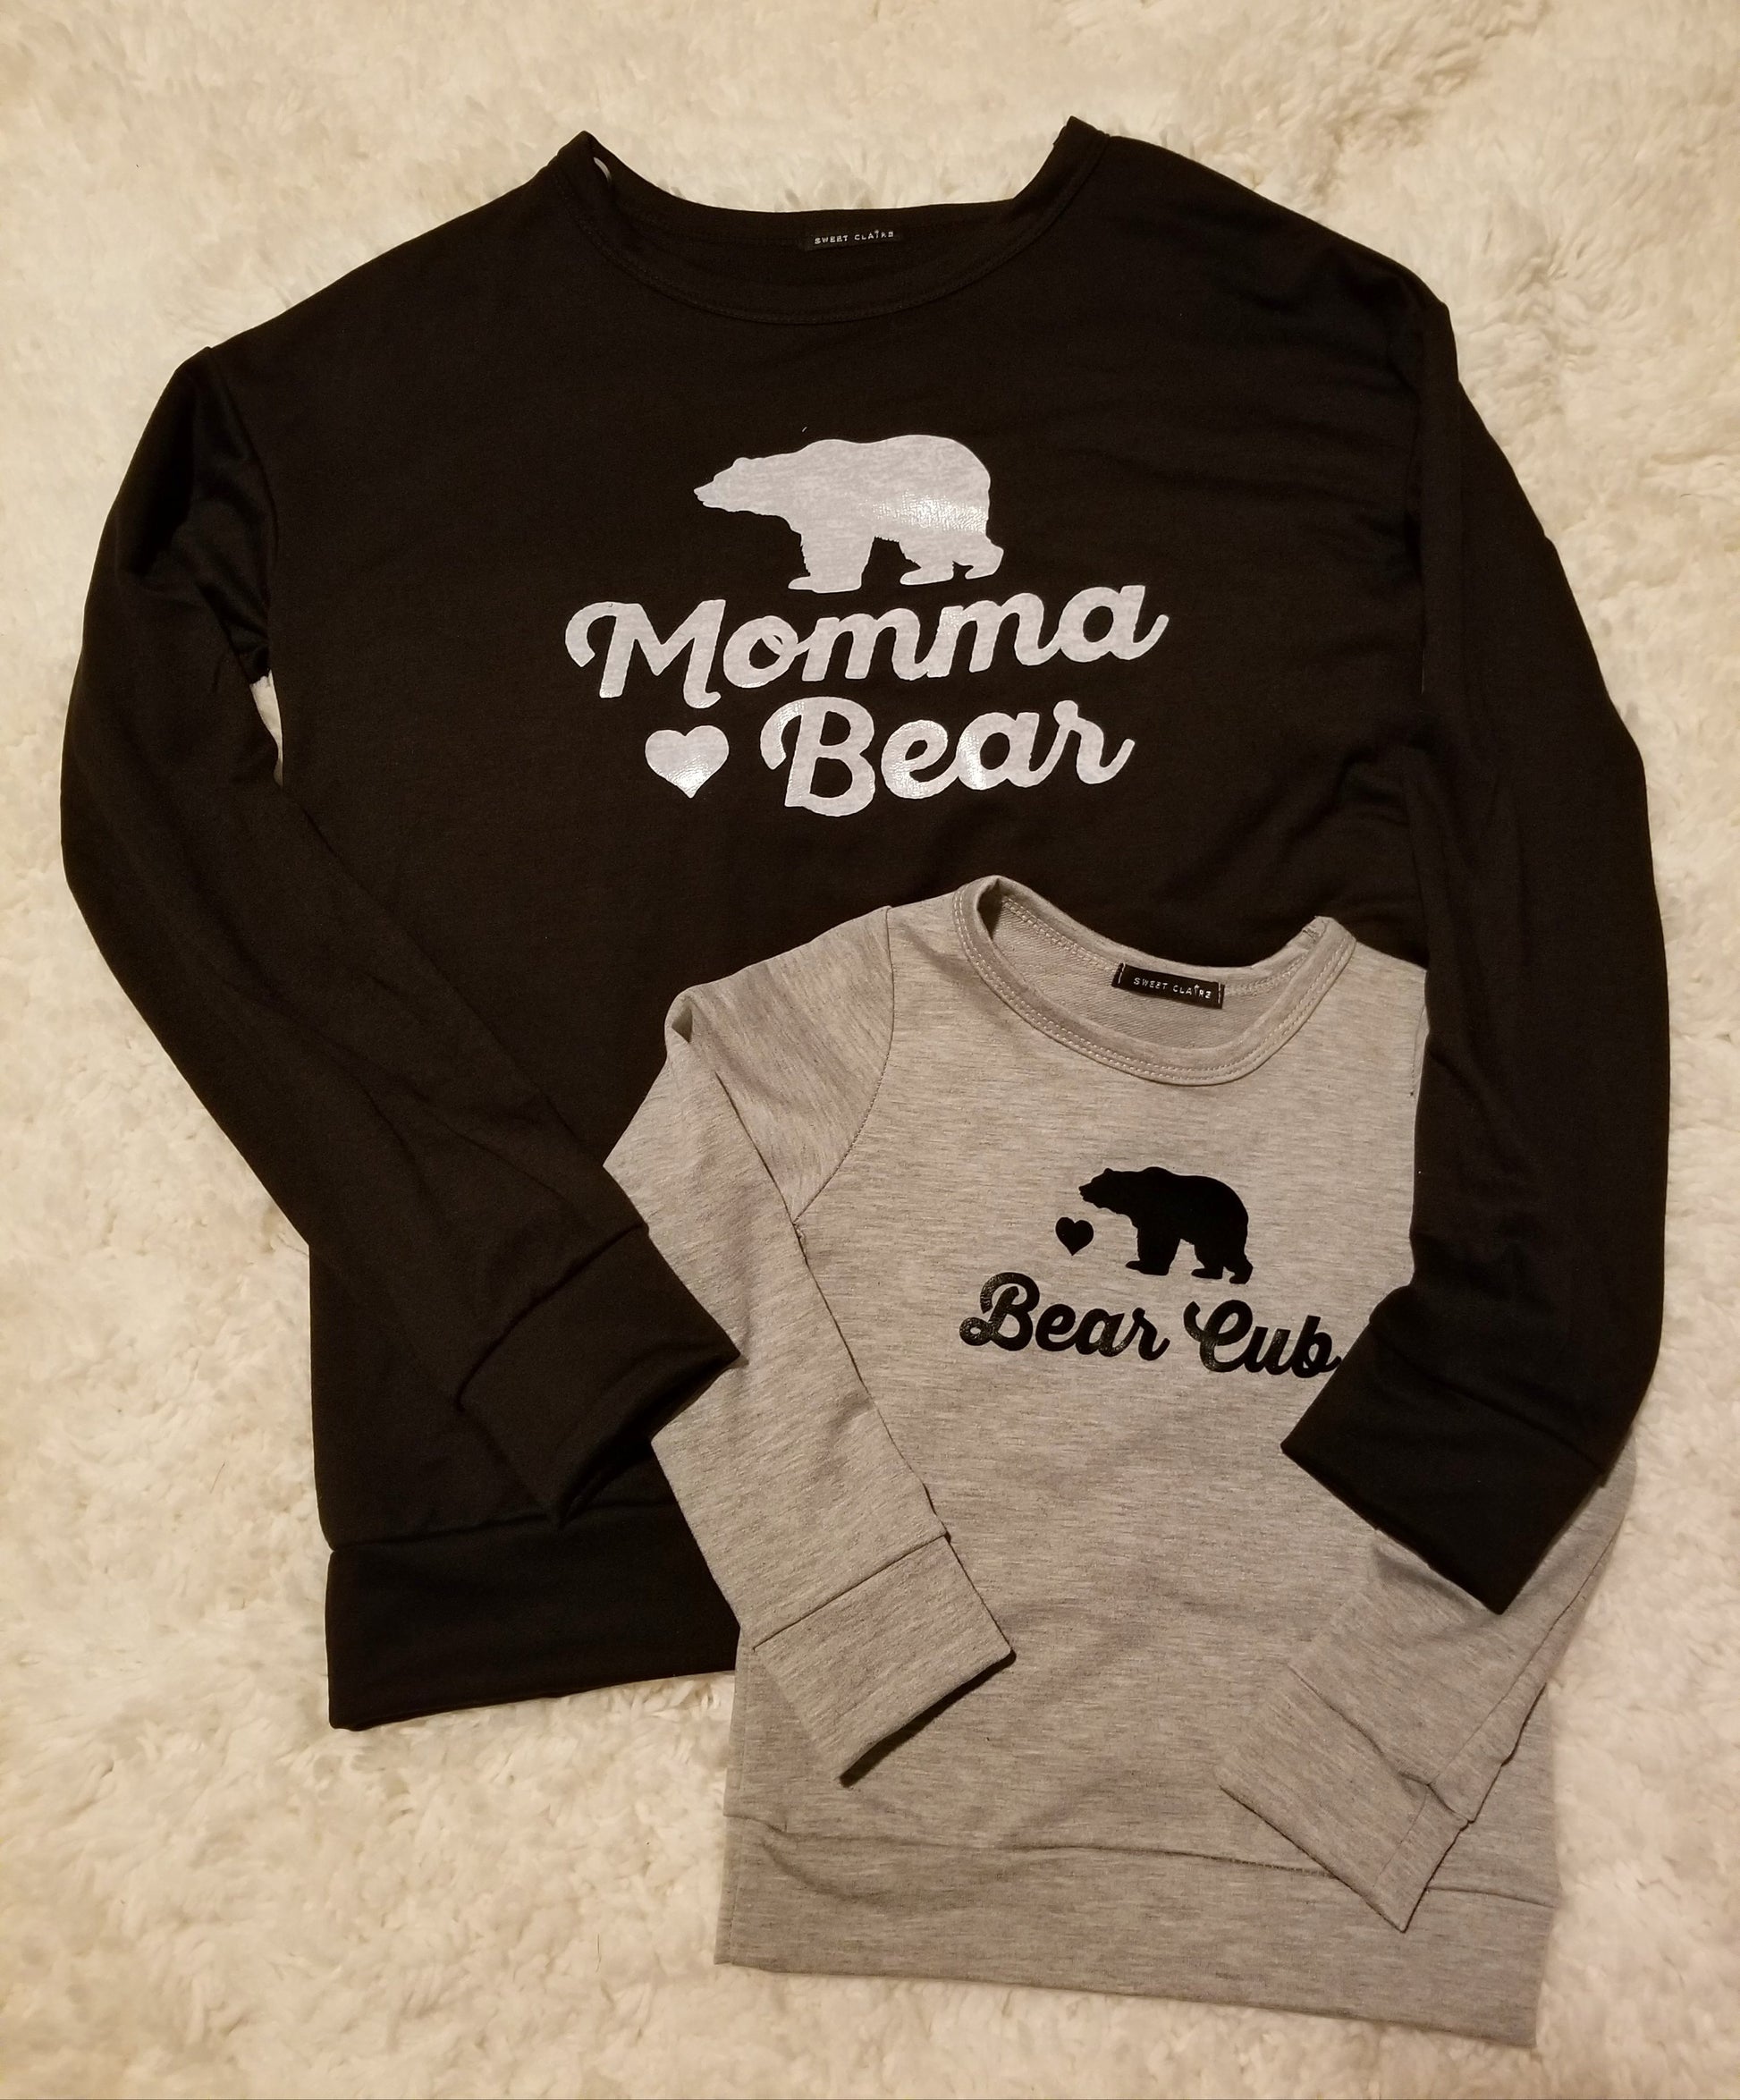 Bear Cub Top - Summer at Payton's Online Boutique